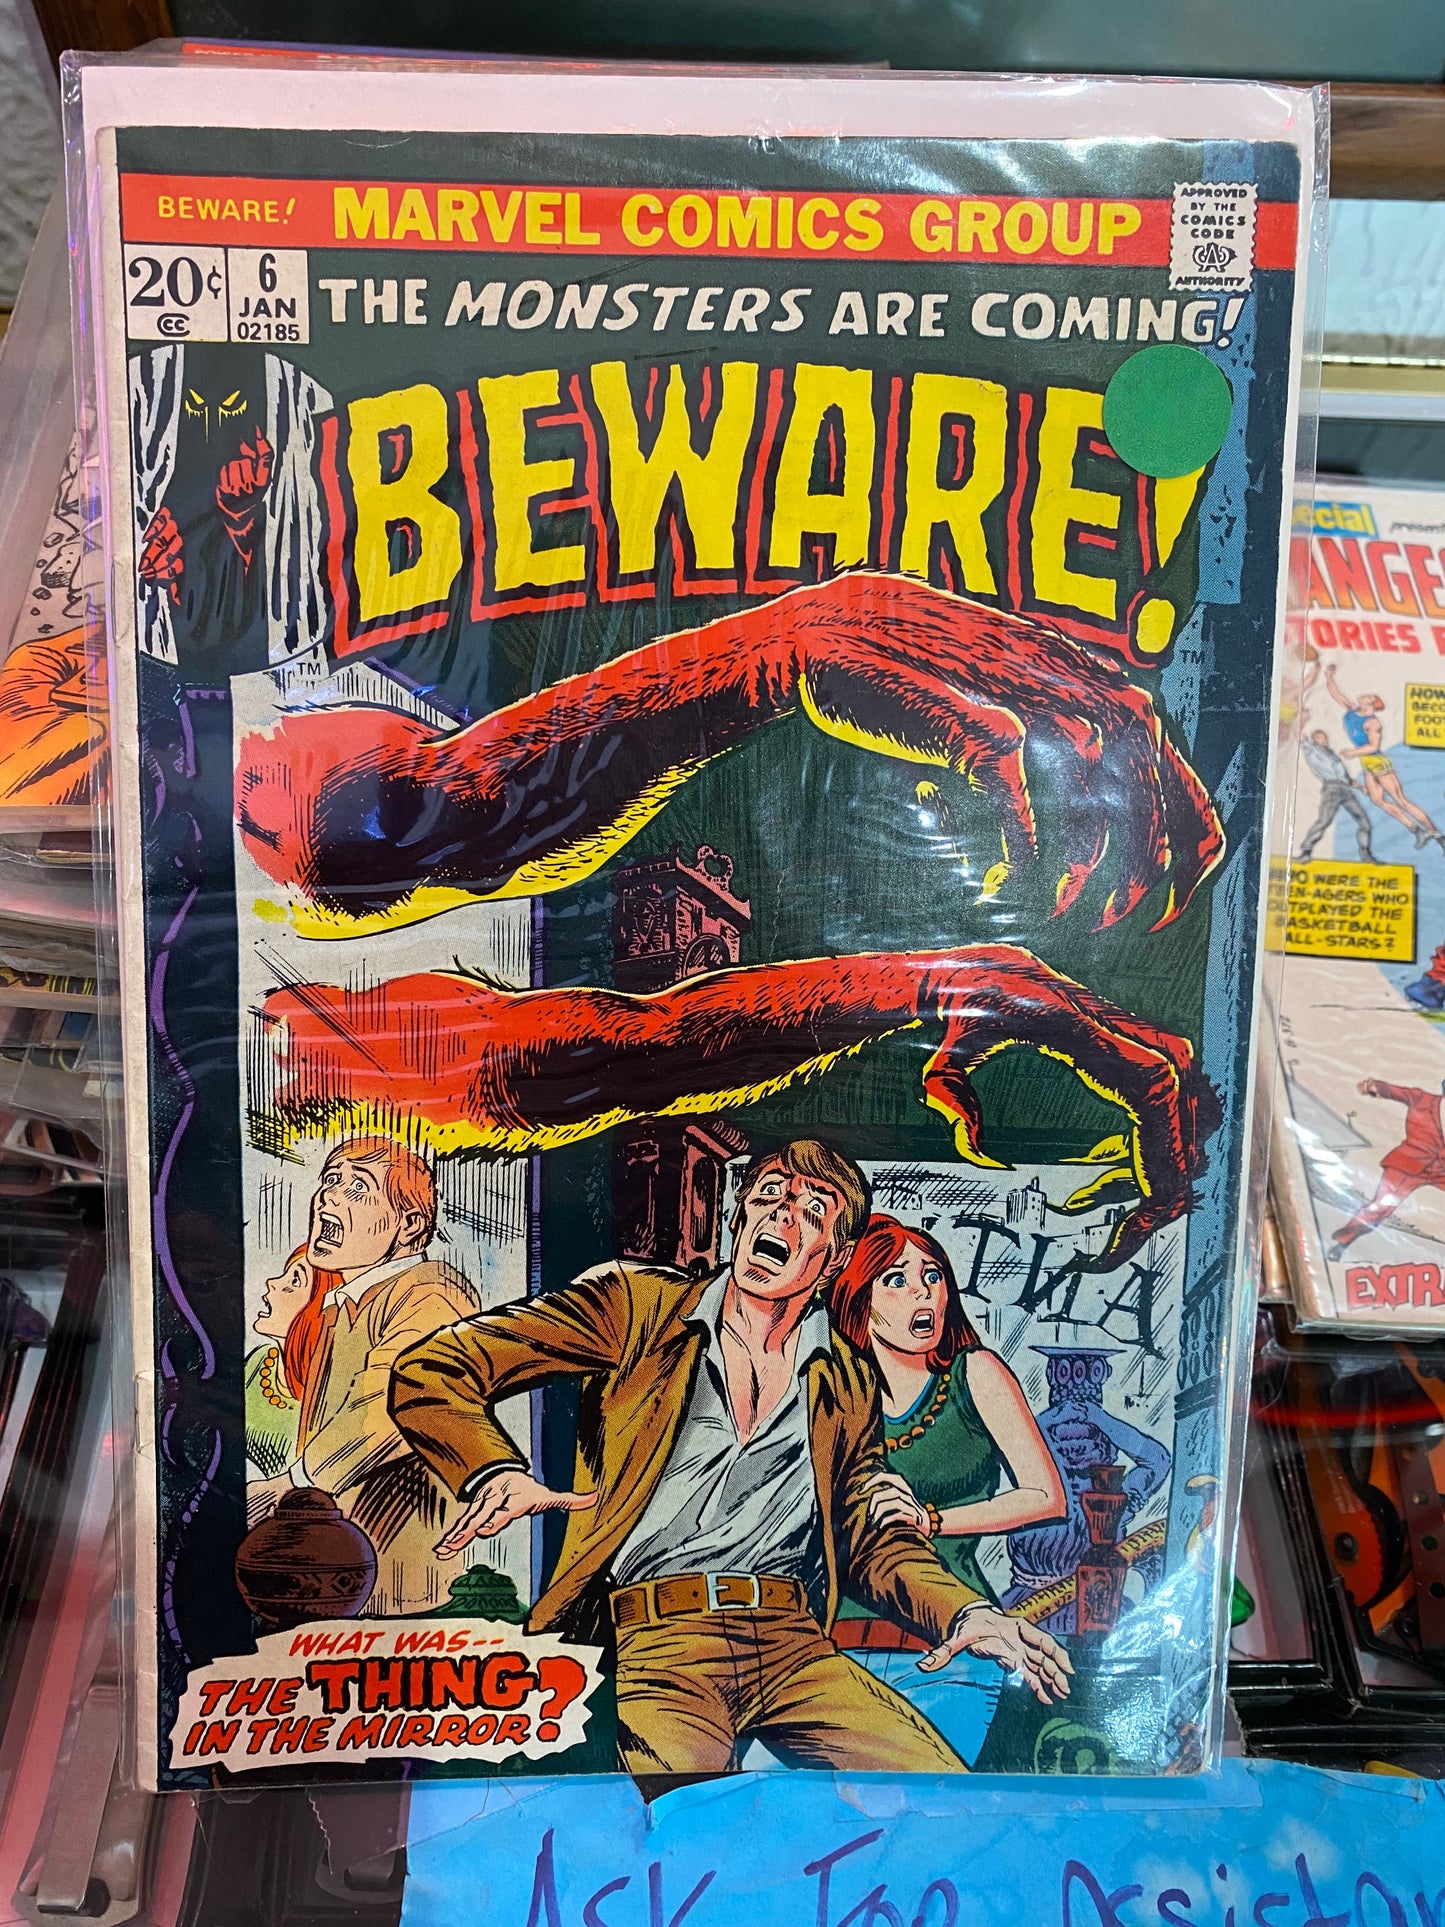 Marvel: Beware! The Monsters Are Coming! Jan. No.6